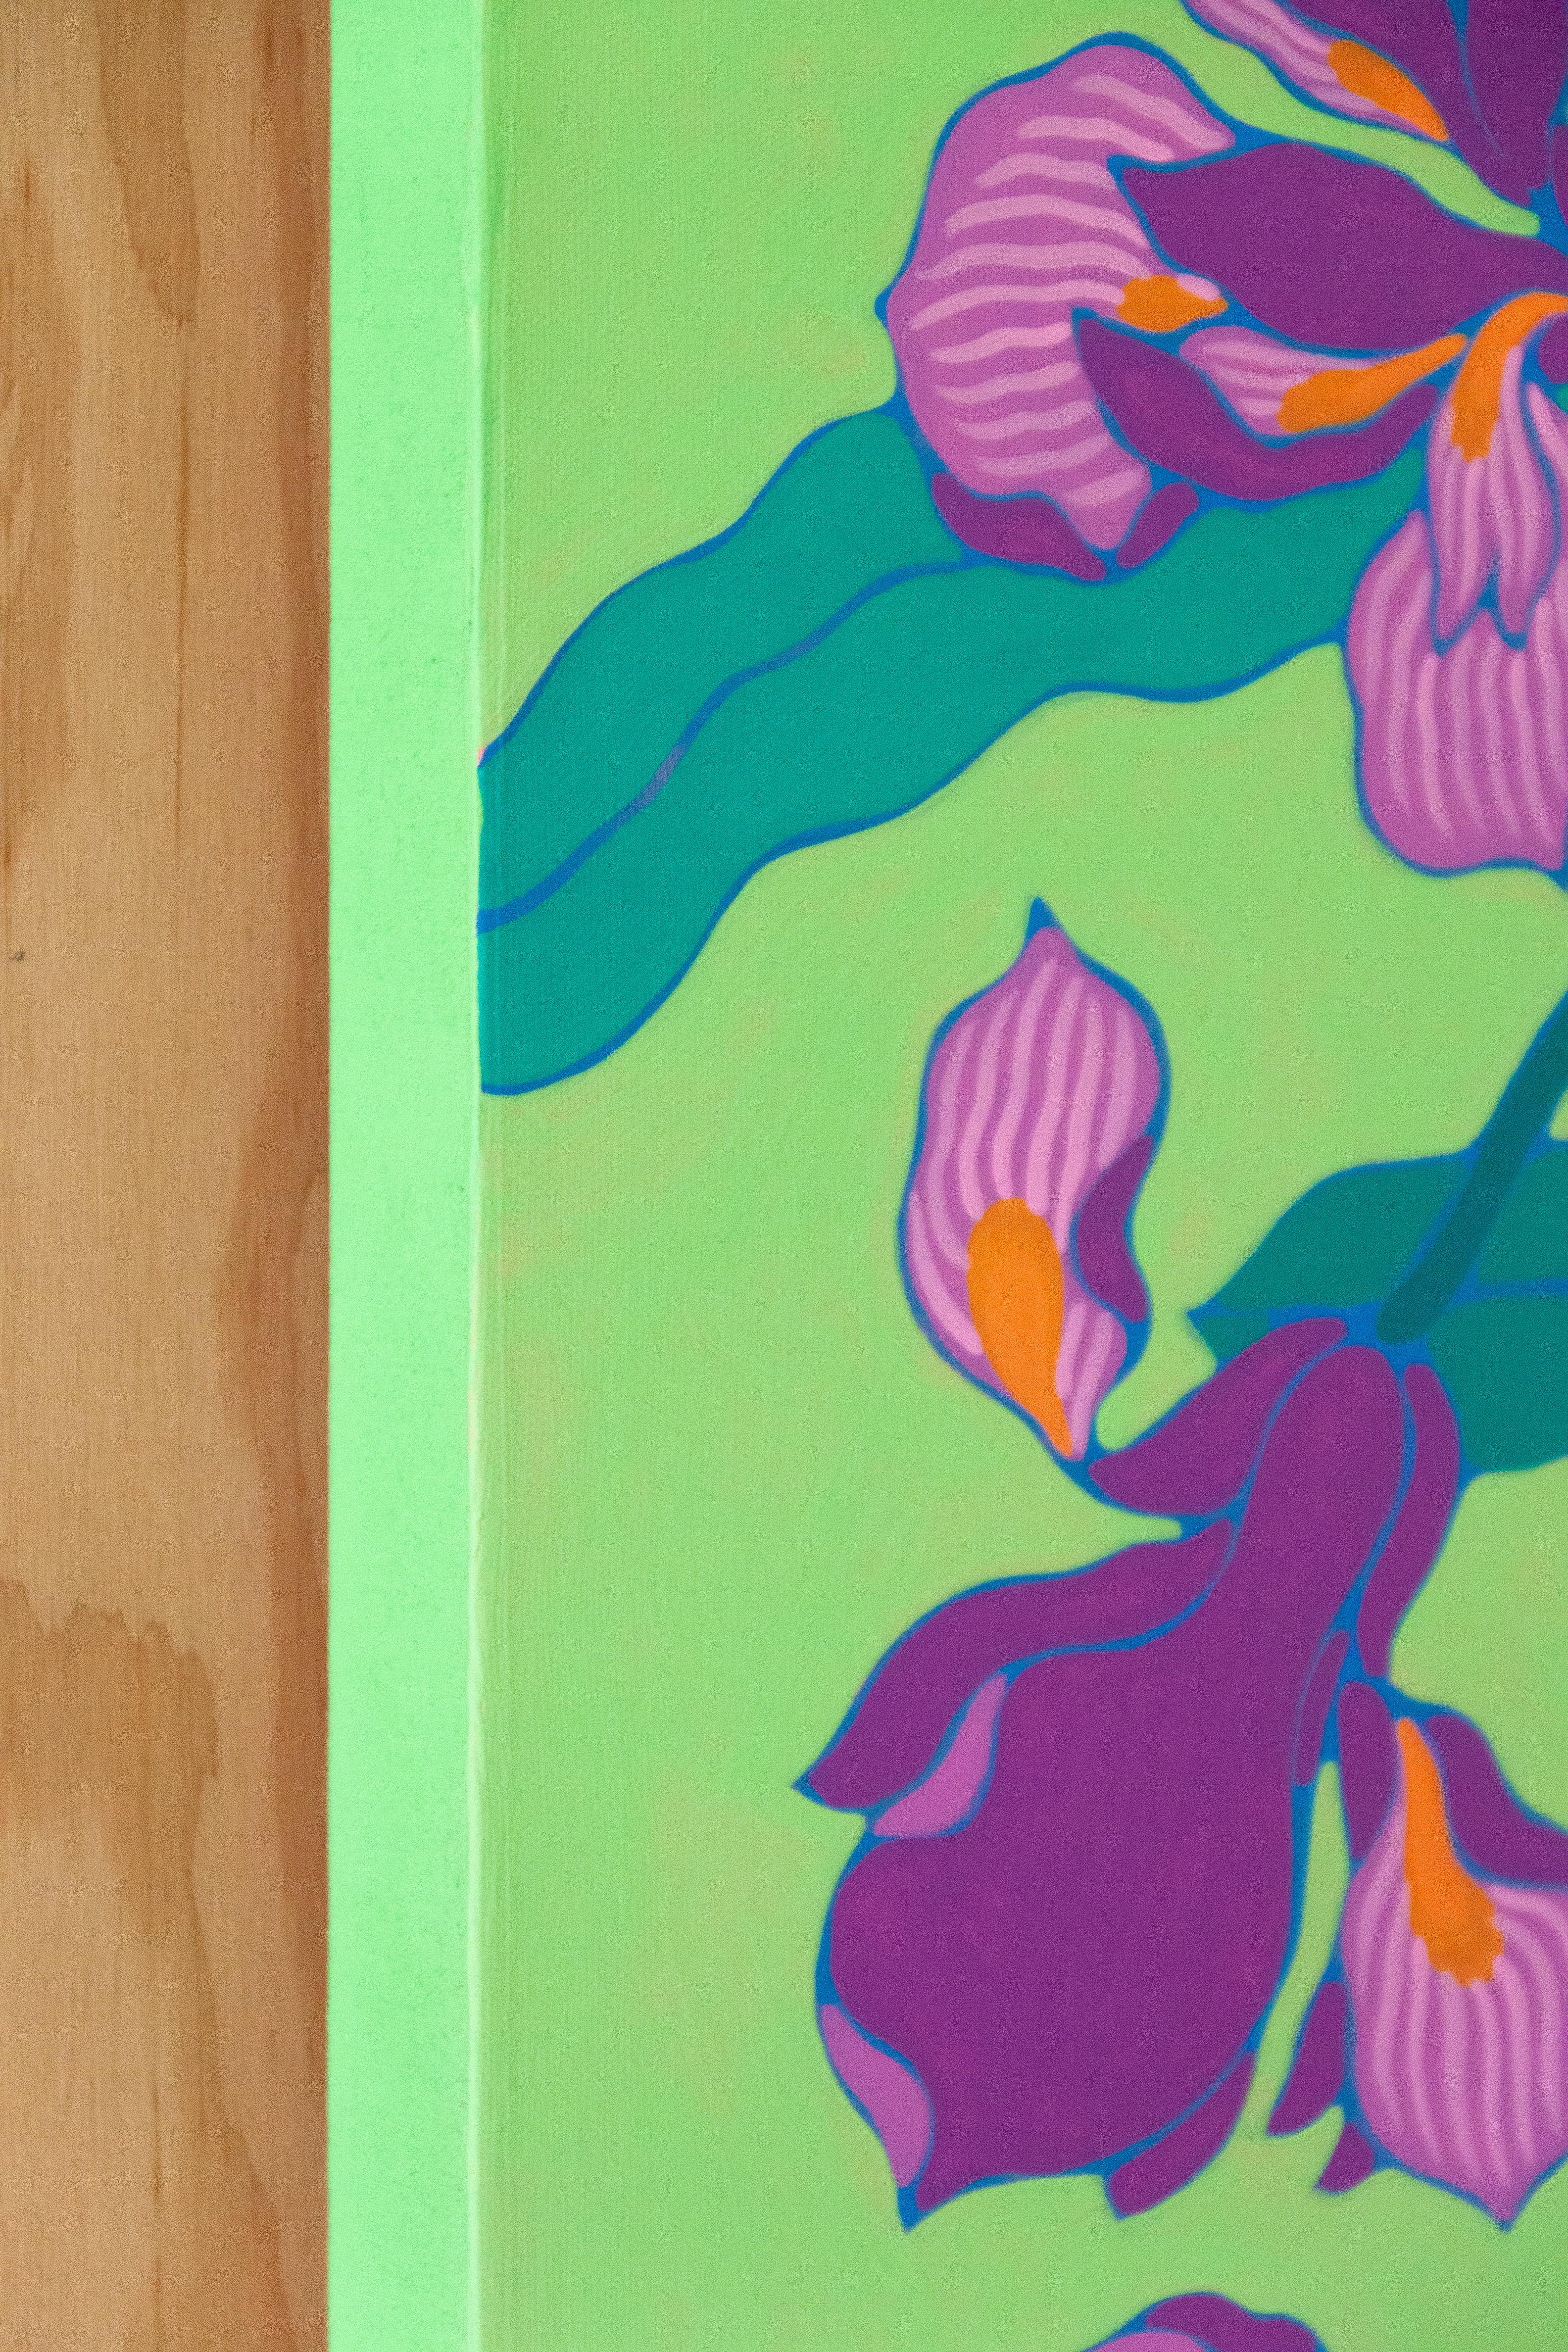 A close-up of a floral painting by Sarah Ingraham in the exhibition Over Order.